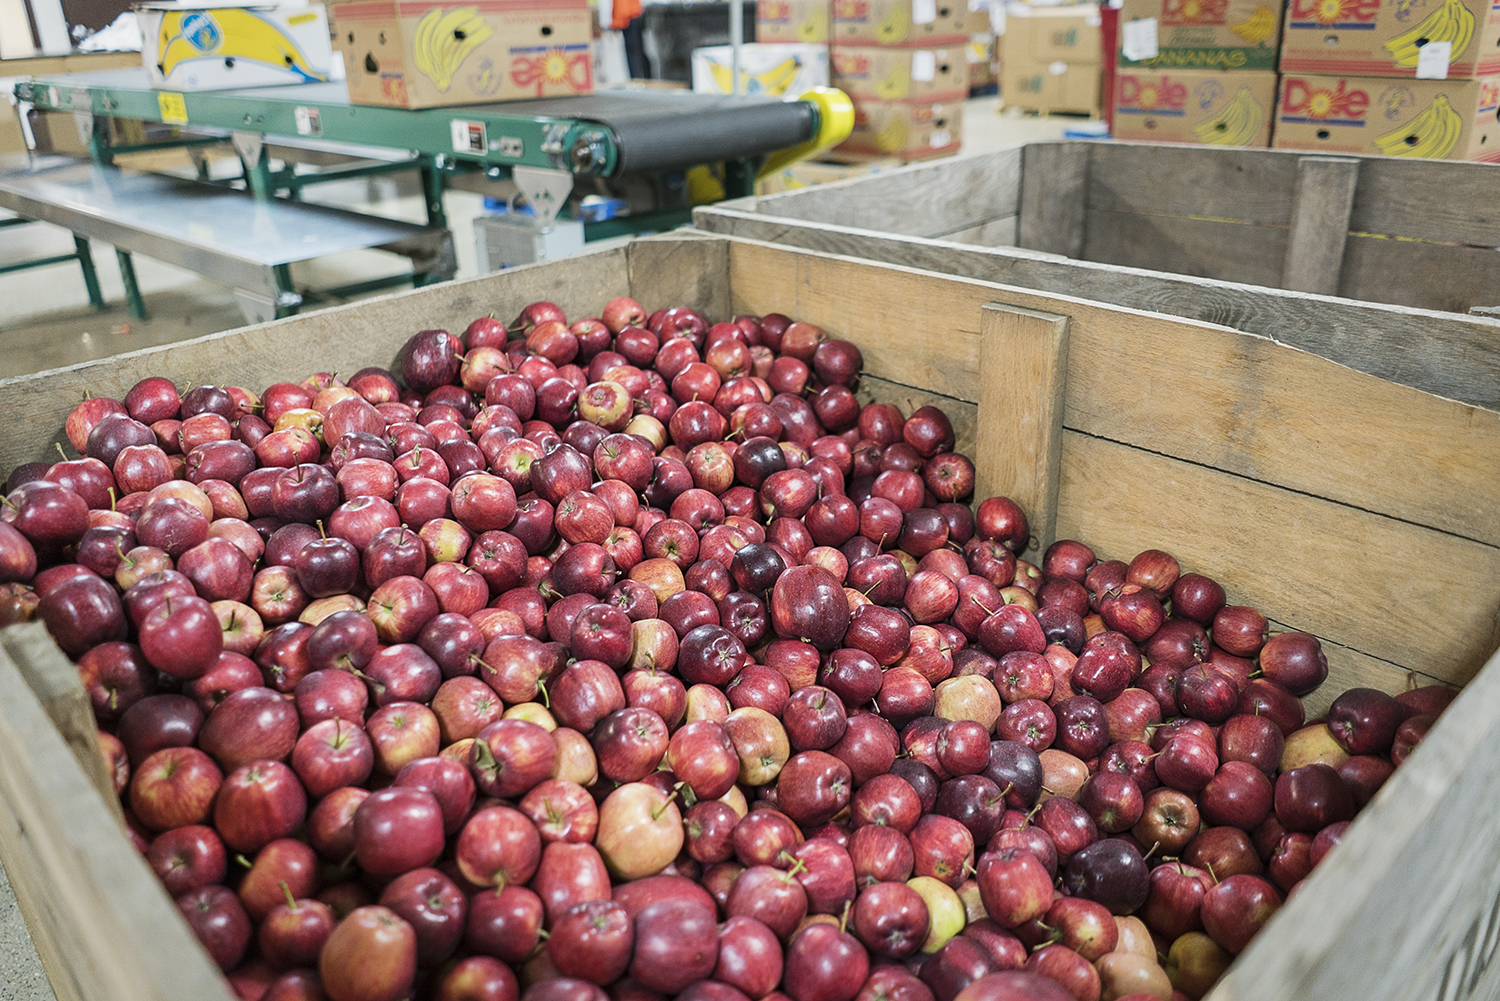 A large crate of apples waits to be sorted in the warehouse of the Food Bank of Eastern Michigan.